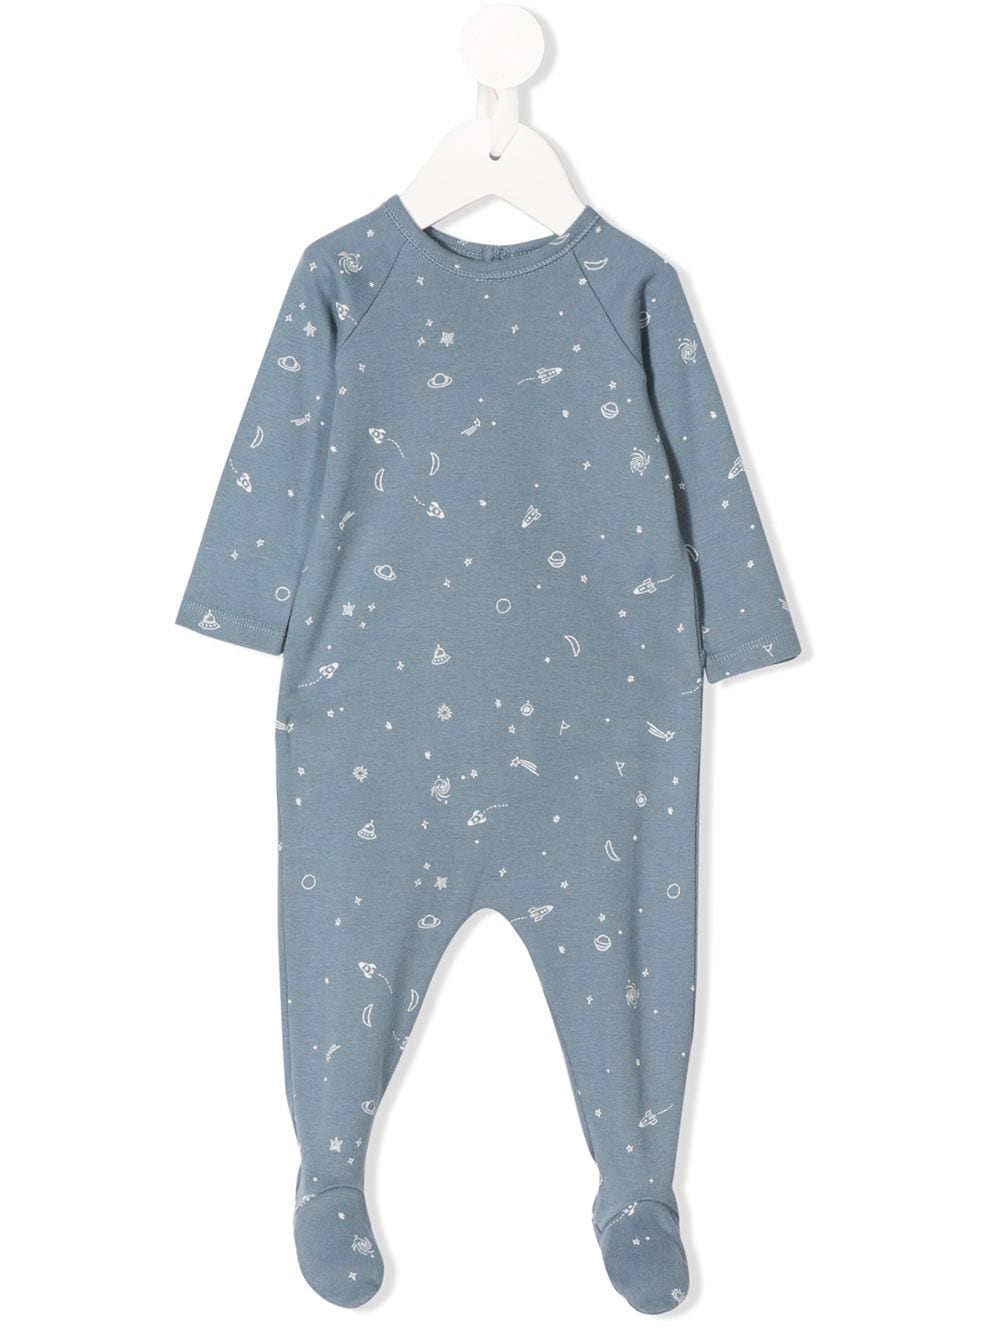 Bonpoint Babies' Space Print Romper In Blue